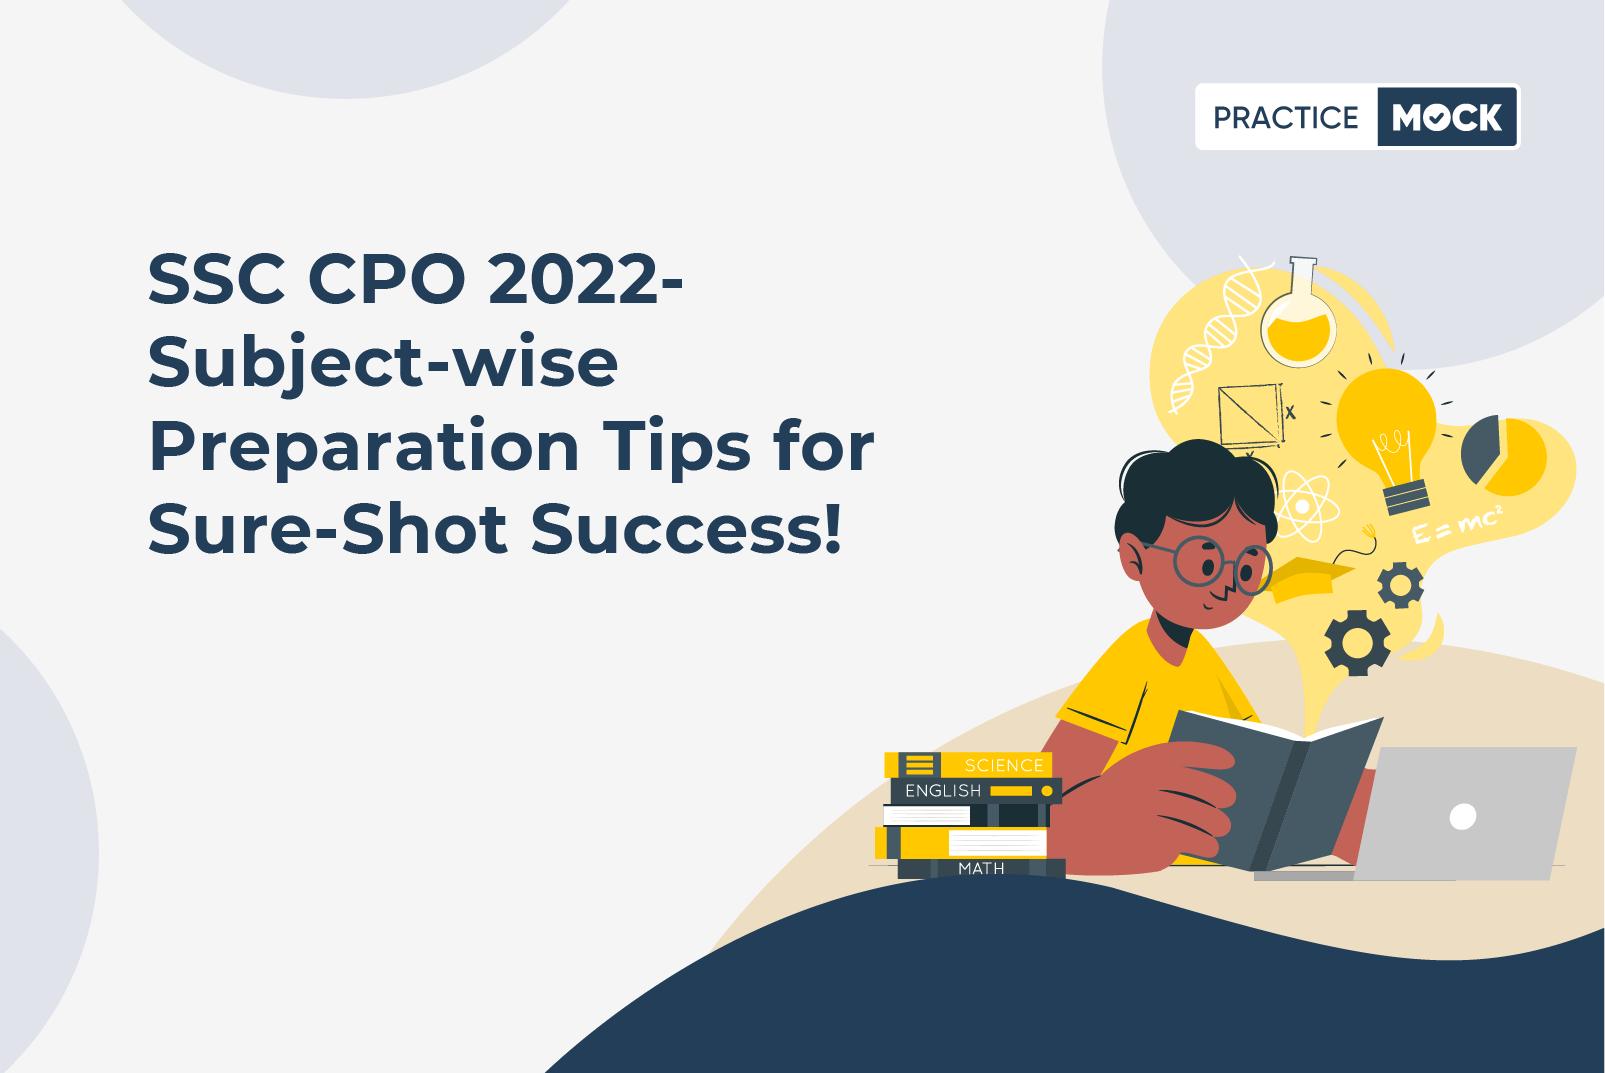 SSC CPO 2022 Subject-wise Preparation Tips